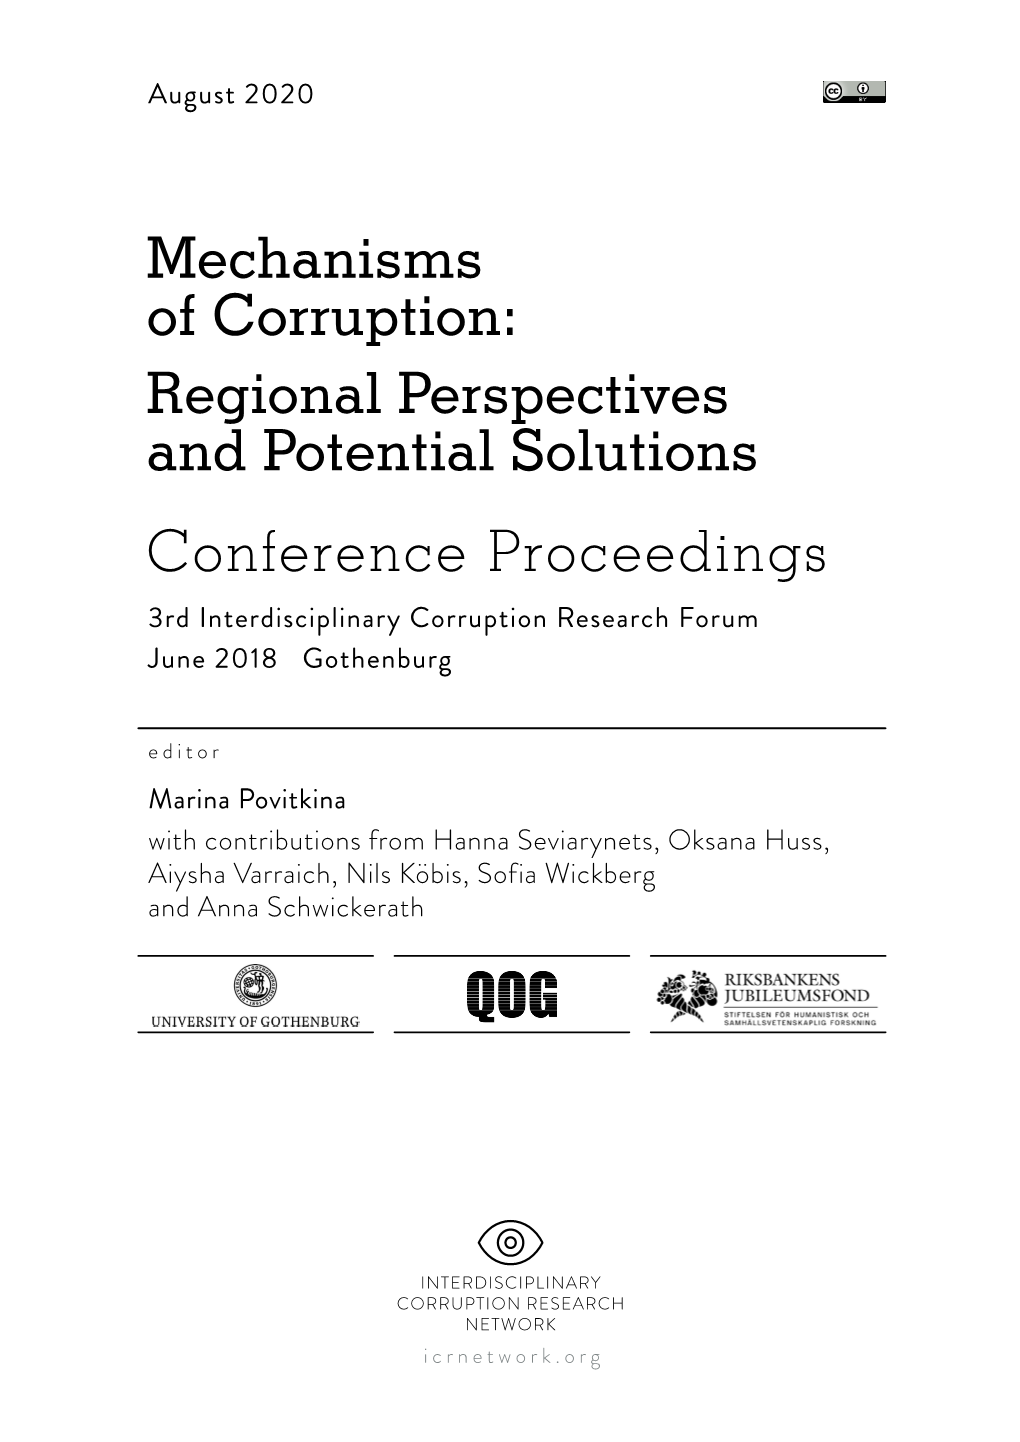 Regional Perspectives and Potential Solutions Conference Proceedings 3Rd Interdisciplinary Corruption Research Forum June 2018 Gothenburg